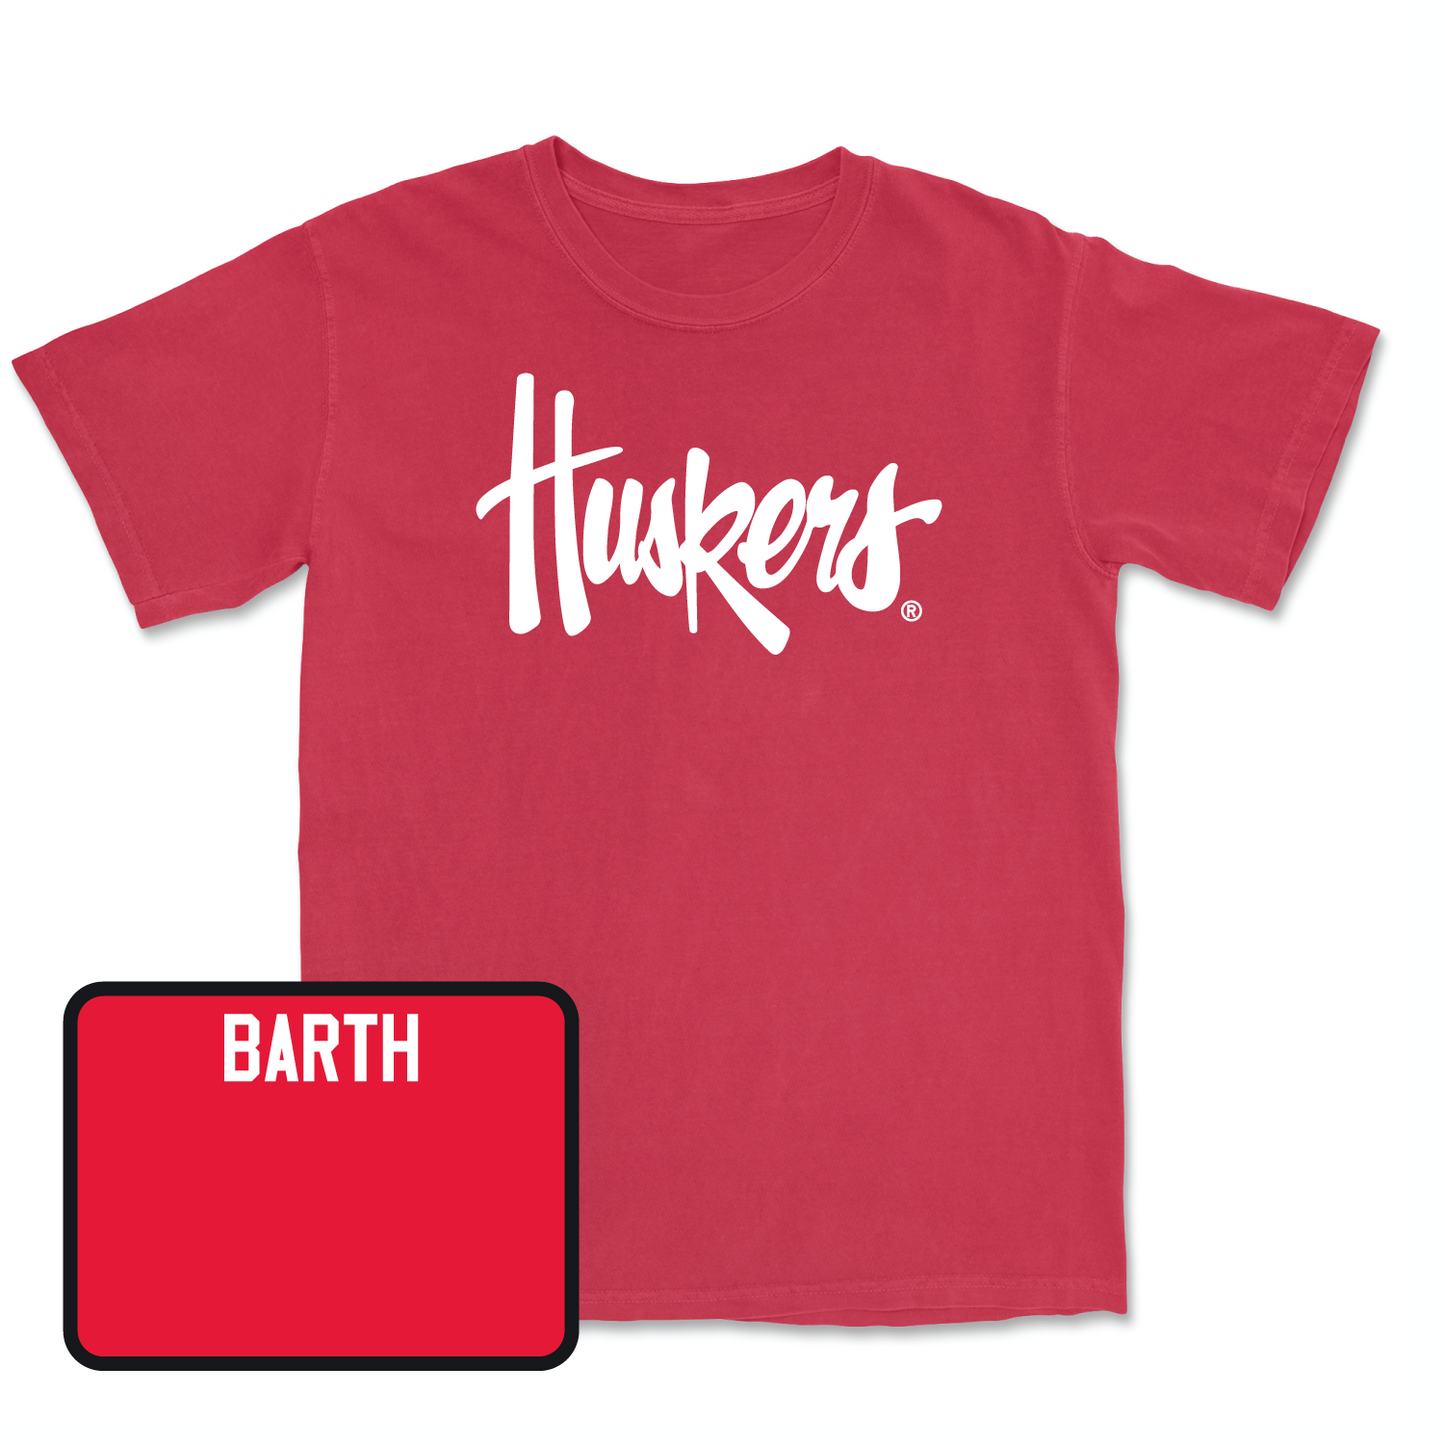 Red Women's Gymnastics Huskers Tee Large / Katelyn Barth